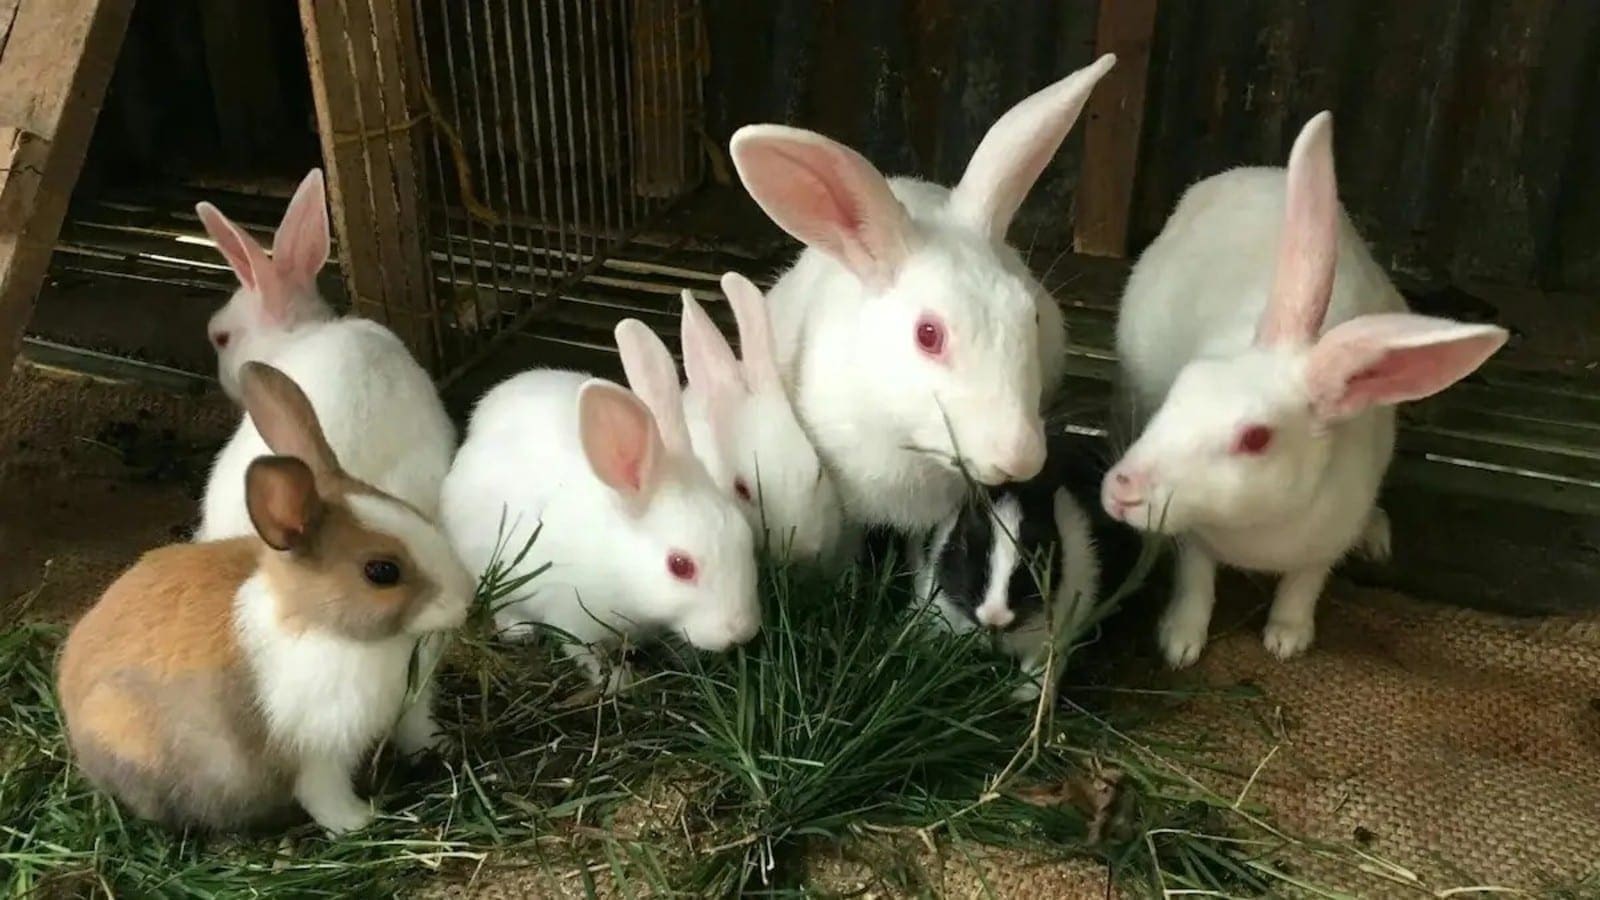 Zimbabwe to undertake inaugural artificial insemination on rabbits in partnership with South African specialist